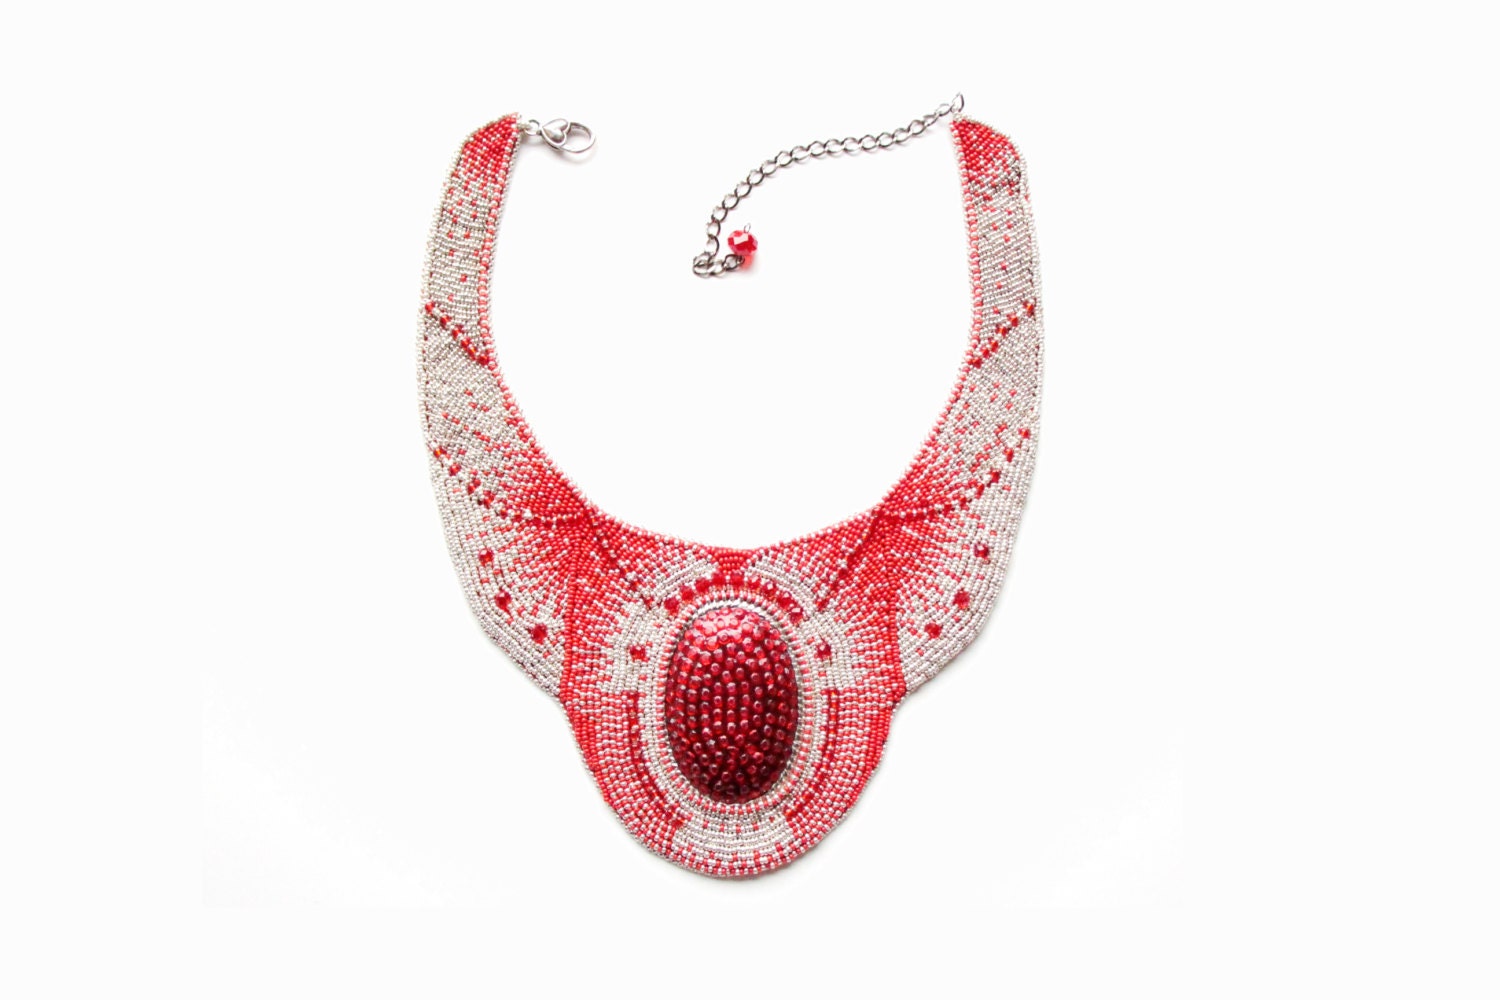 Red silver seed bead embroidery necklace Egyptian Large beaded jewelry embroidered Statement Cocktail party disco Beadwork Spring gift - RasaVilJewelry